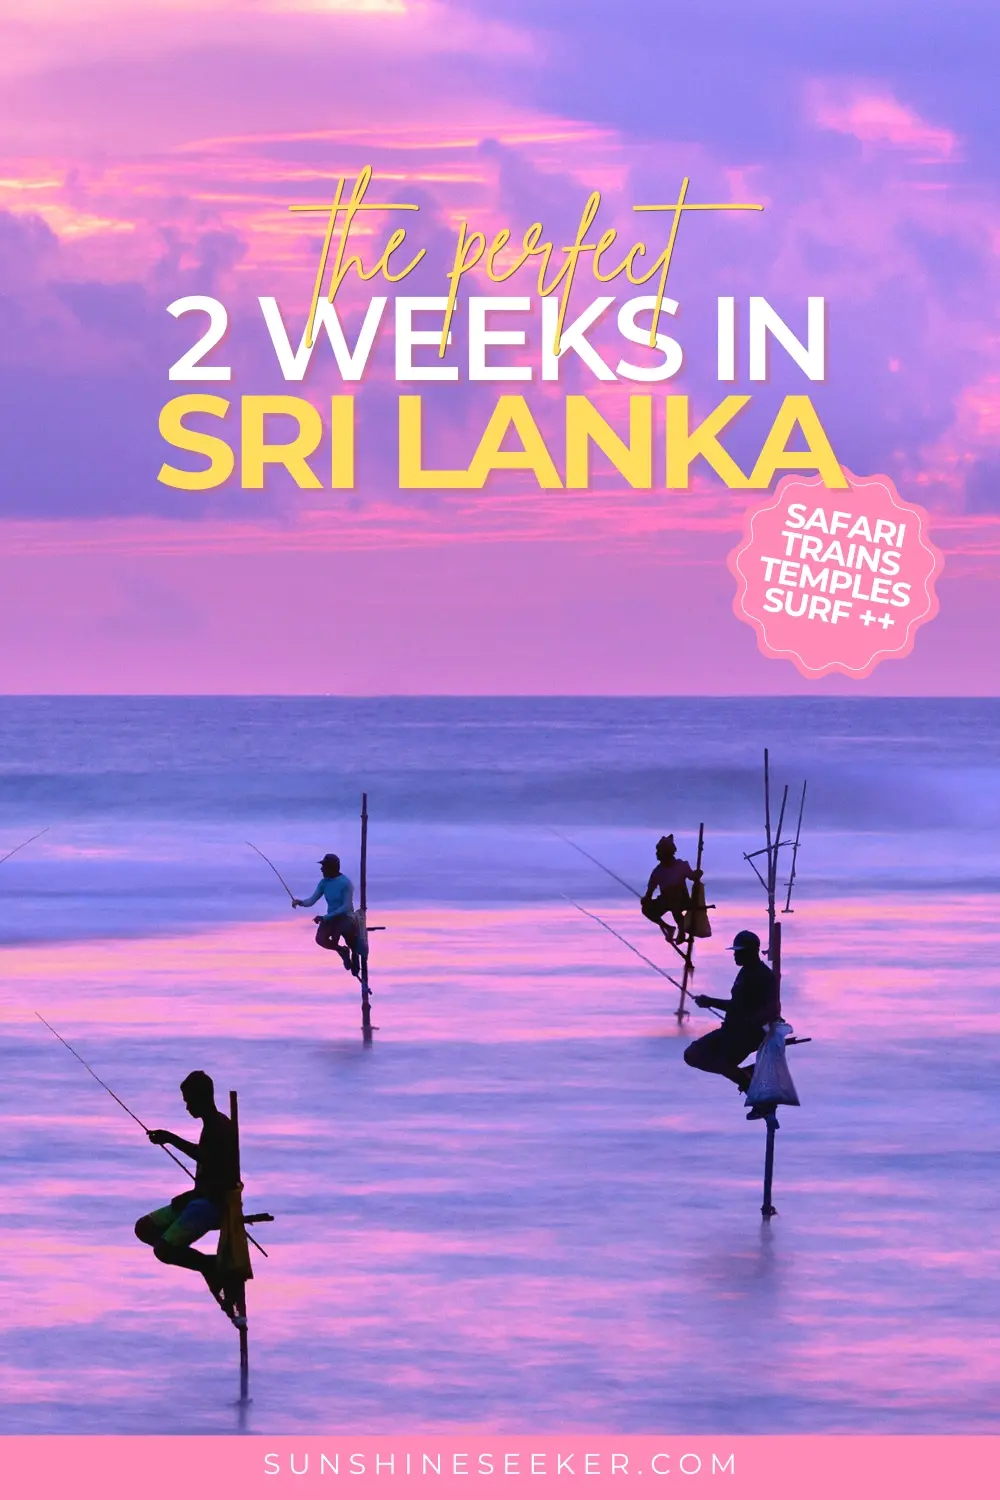 Are you looking for the perfect way to spend your 2 weeks in Sri Lanka? Click through for the ultimate two-weeks Sri Lanka itinerary for first-timers. It includes beaches, surfing, hiking, temples and the beautiful train ride form Kandy to Ella.